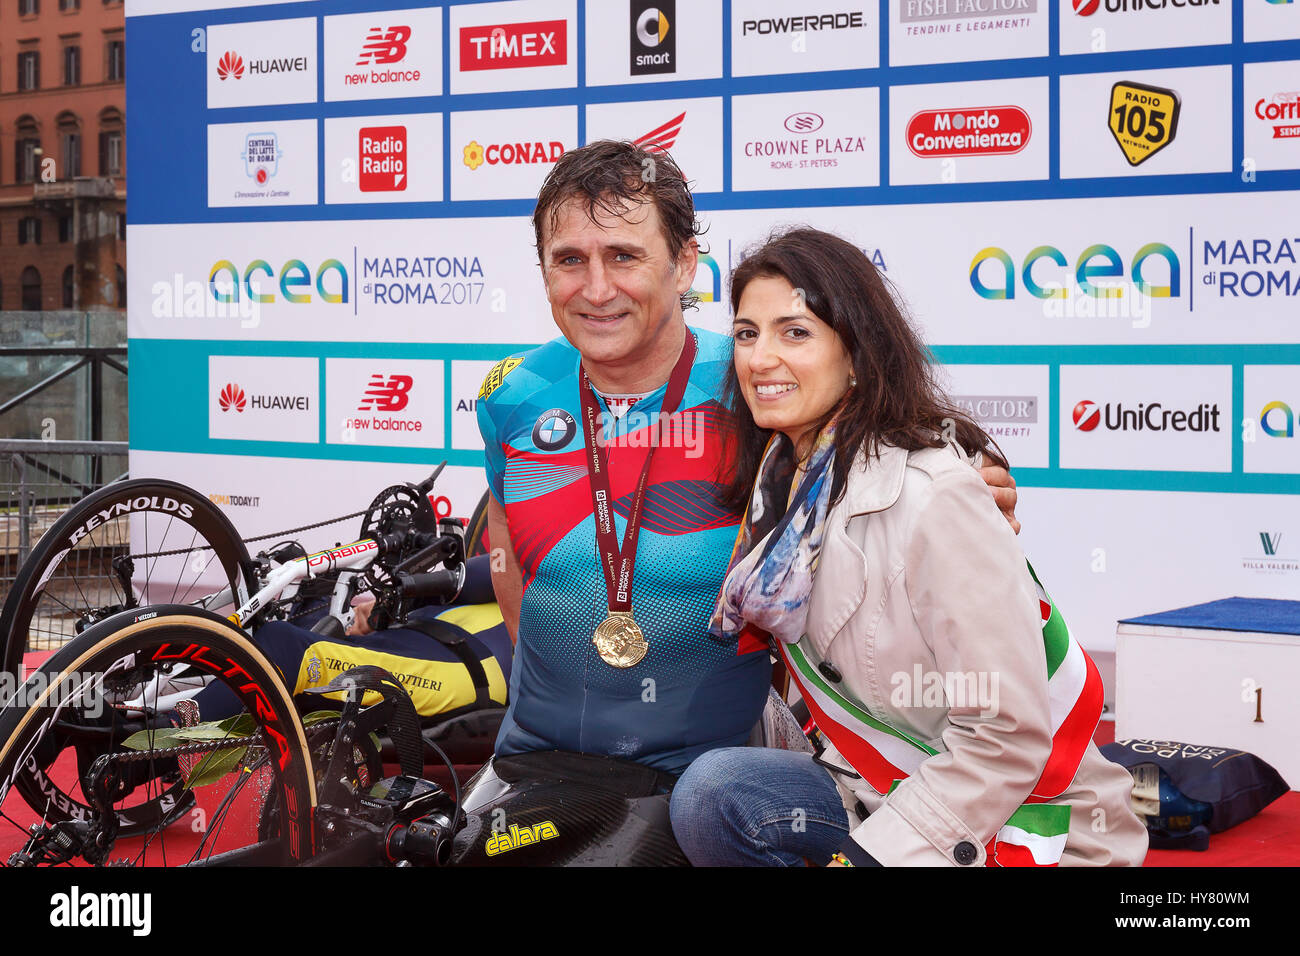 Rome, Italy. 02nd Apr, 2017. Alex Zanardi is the winner of the hand bike race of 23rd Rome Marathon. On stage together with the mayor Virginia Raggi during the award ceremony. Credit: Polifoto/Alamy Live News Stock Photo